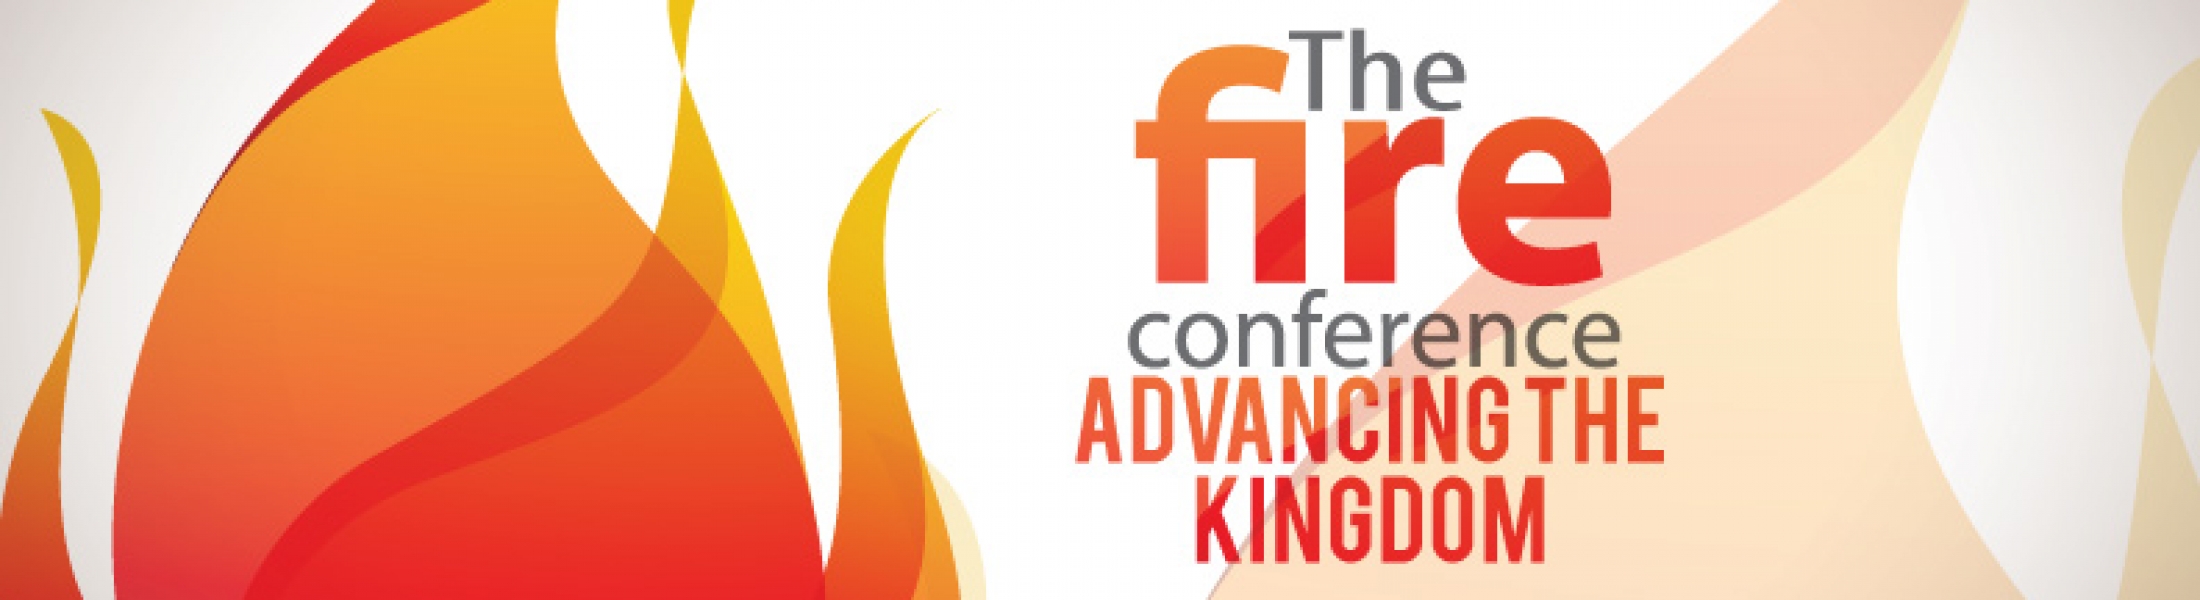 The Fire Conference Advancing the Kingdom Liberty Church